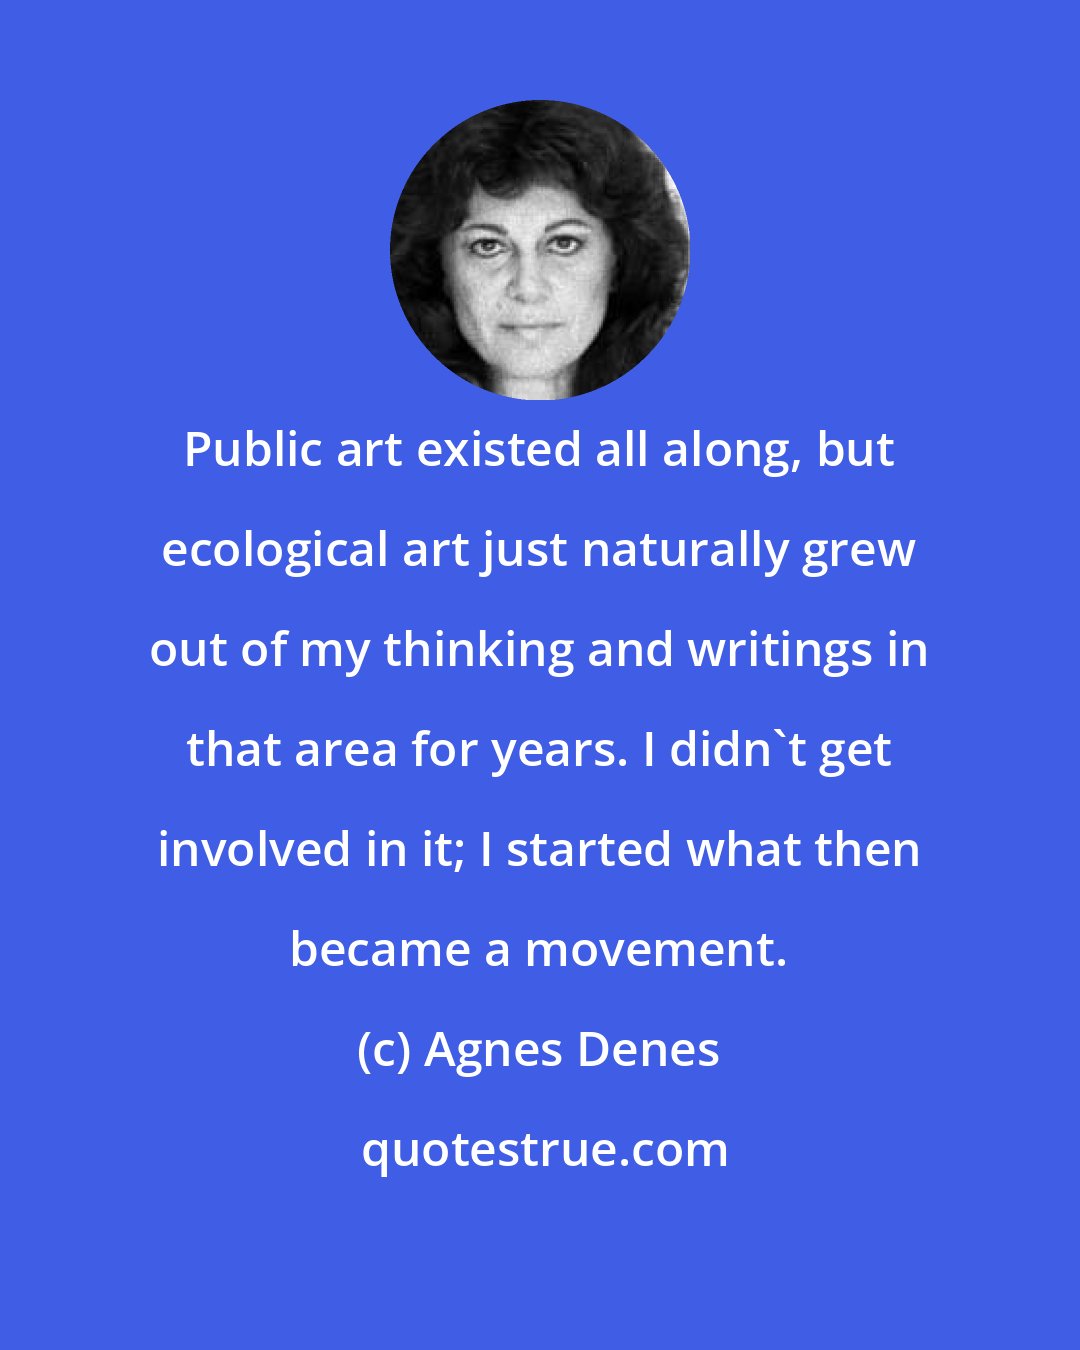 Agnes Denes: Public art existed all along, but ecological art just naturally grew out of my thinking and writings in that area for years. I didn't get involved in it; I started what then became a movement.